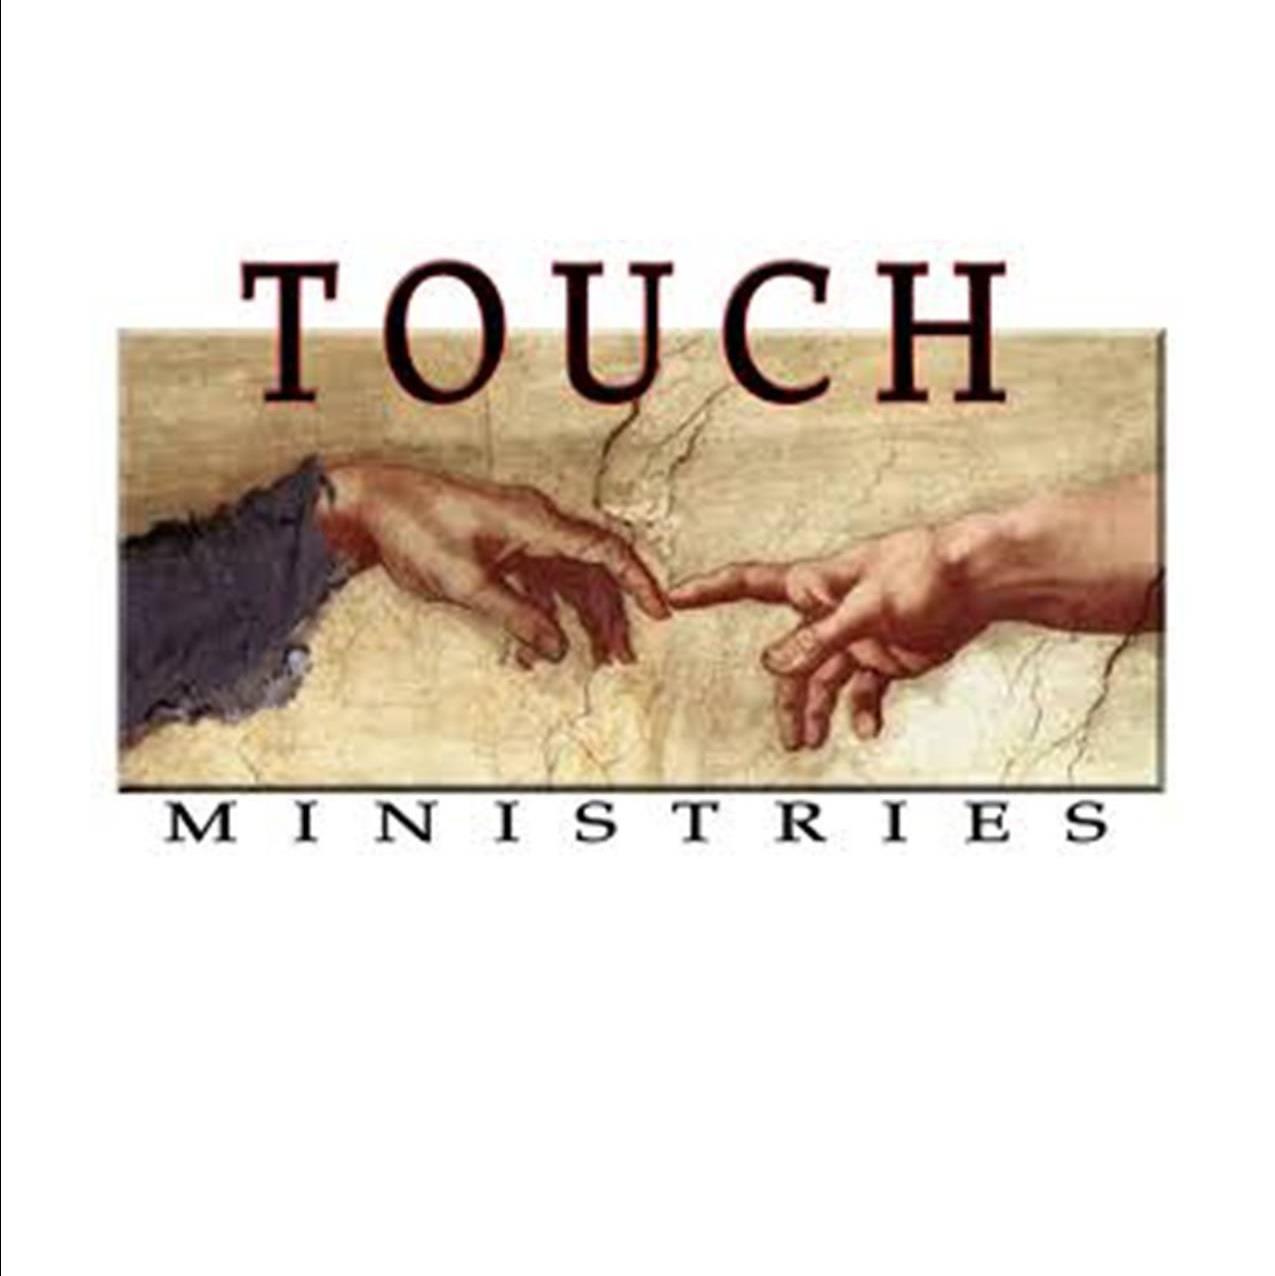 Touch Ministries - Food Pantry